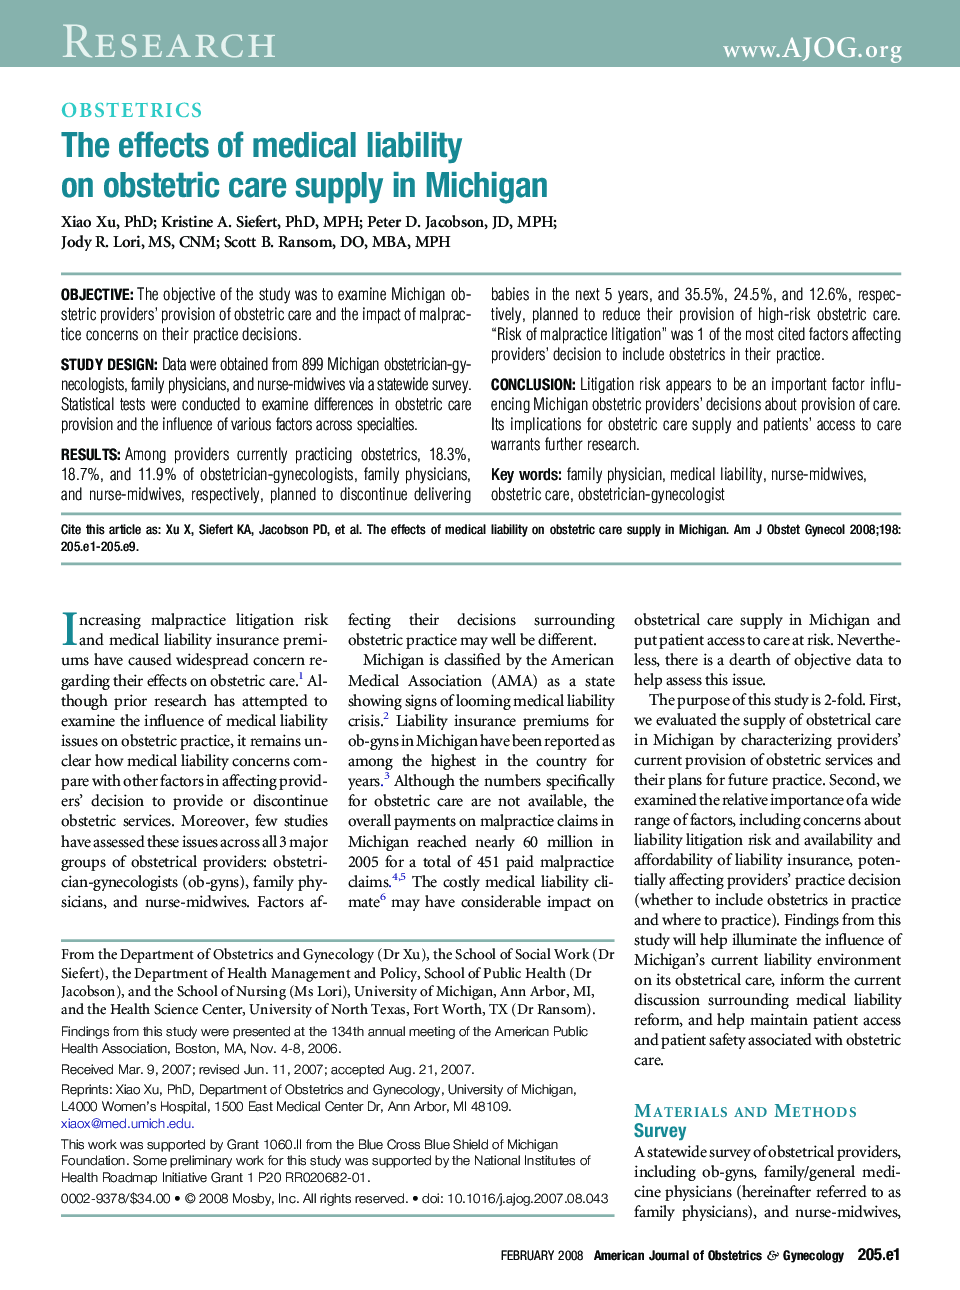 The effects of medical liability on obstetric care supply in Michigan